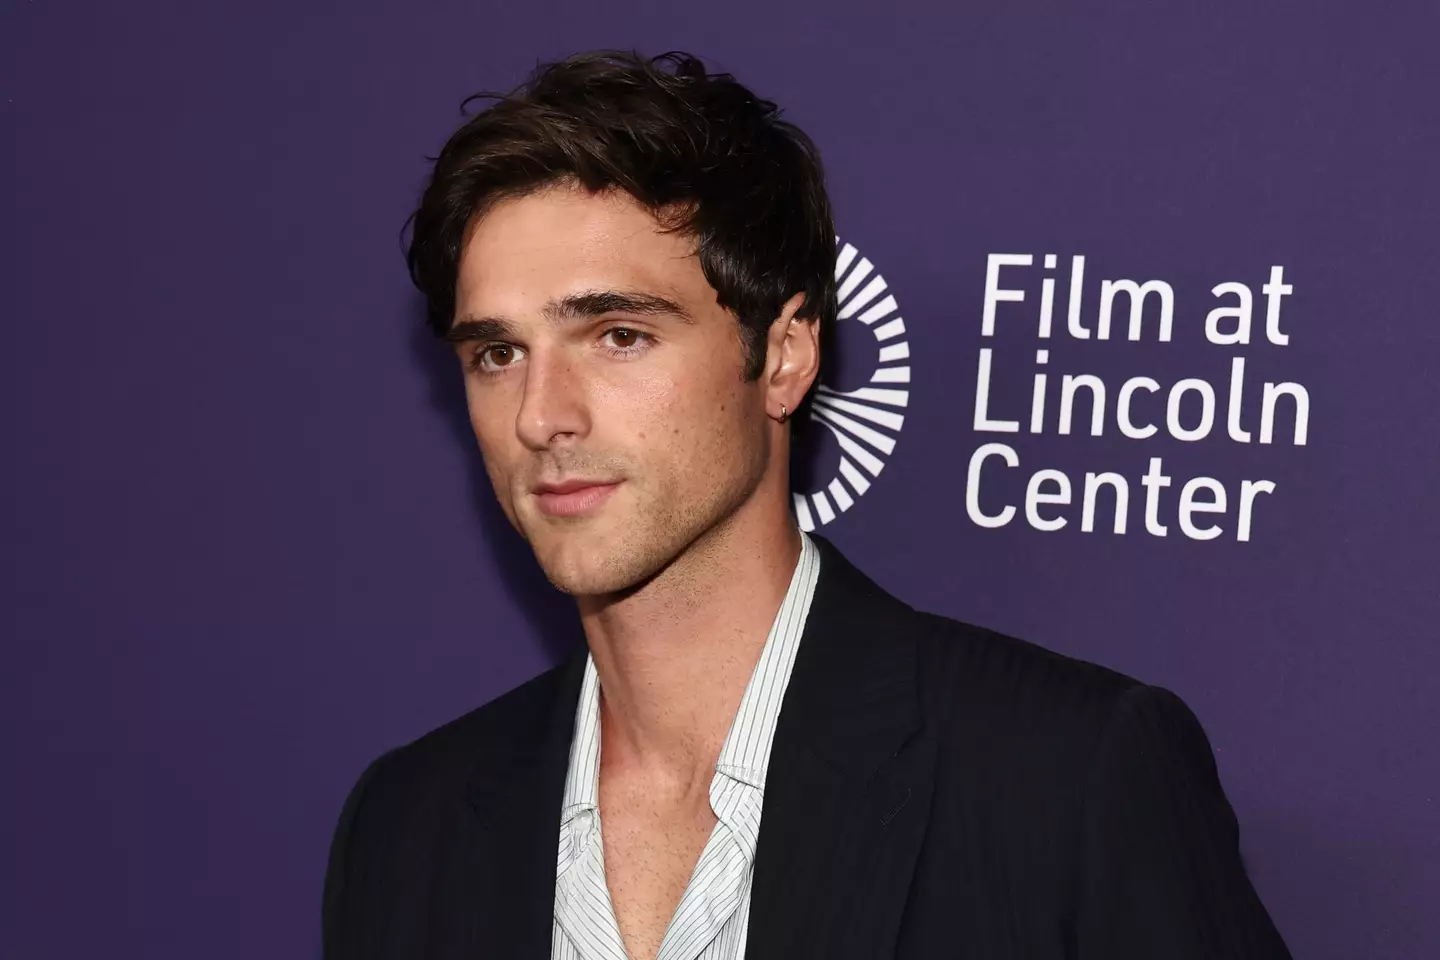 Jacob Elordi admitted he ate a pound of bacon every day.